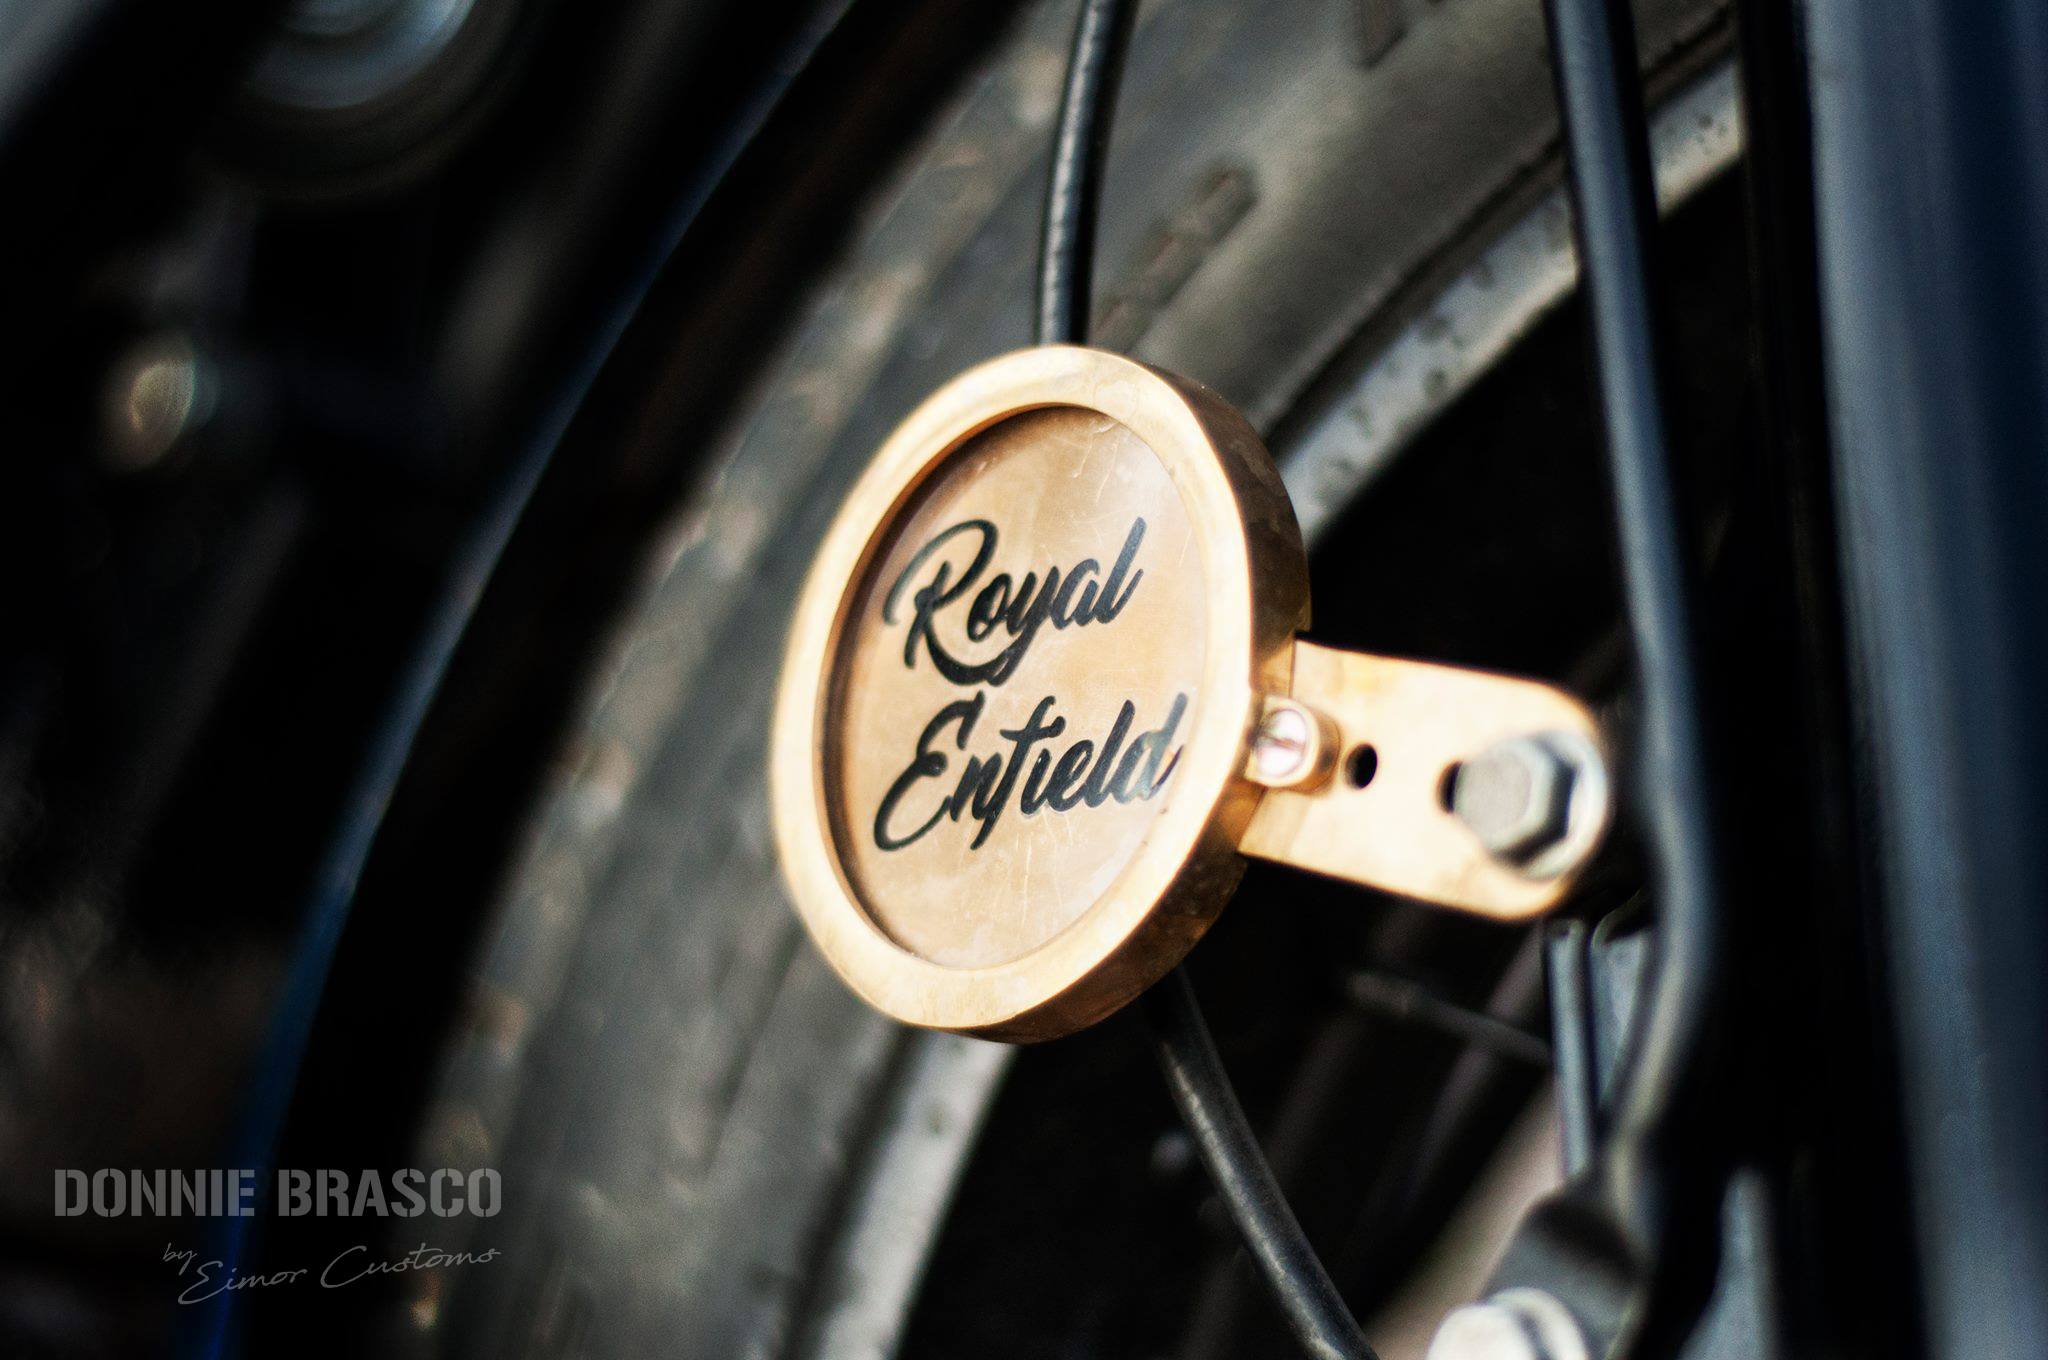 EIMOR Royal Enfield Classic 'Donnie Brasco' Details and Photos - snapshot